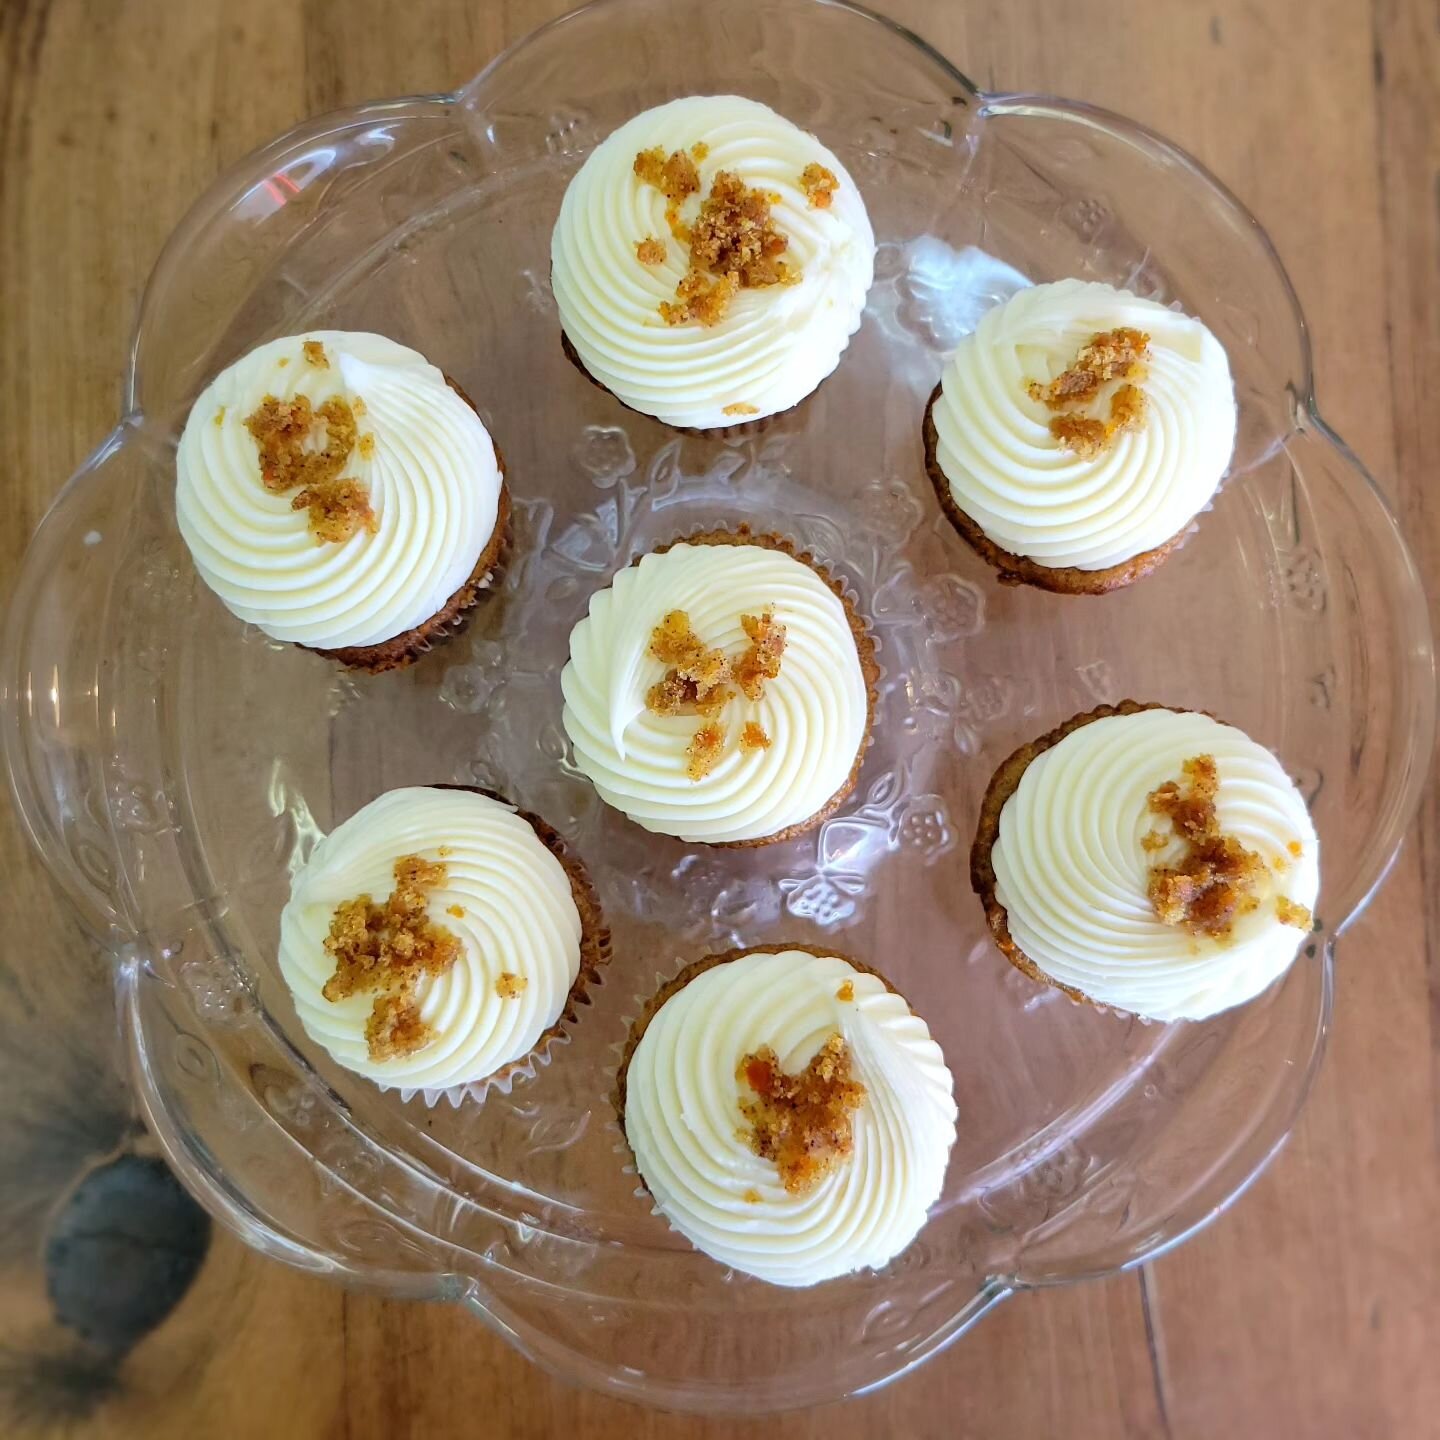 📸 Carrot Cake Cupcakes

📸 Philly Cheesesteak

Specials for Friday, May 19th:

Lunch: Philly Cheesesteak with Shaved Ribeye &amp; Sirloin, Provolone, Caramelized Onion with a Homemade Garlic Aioli on a Grilled Hoagie $14.99

Drink: Strawberry Banana